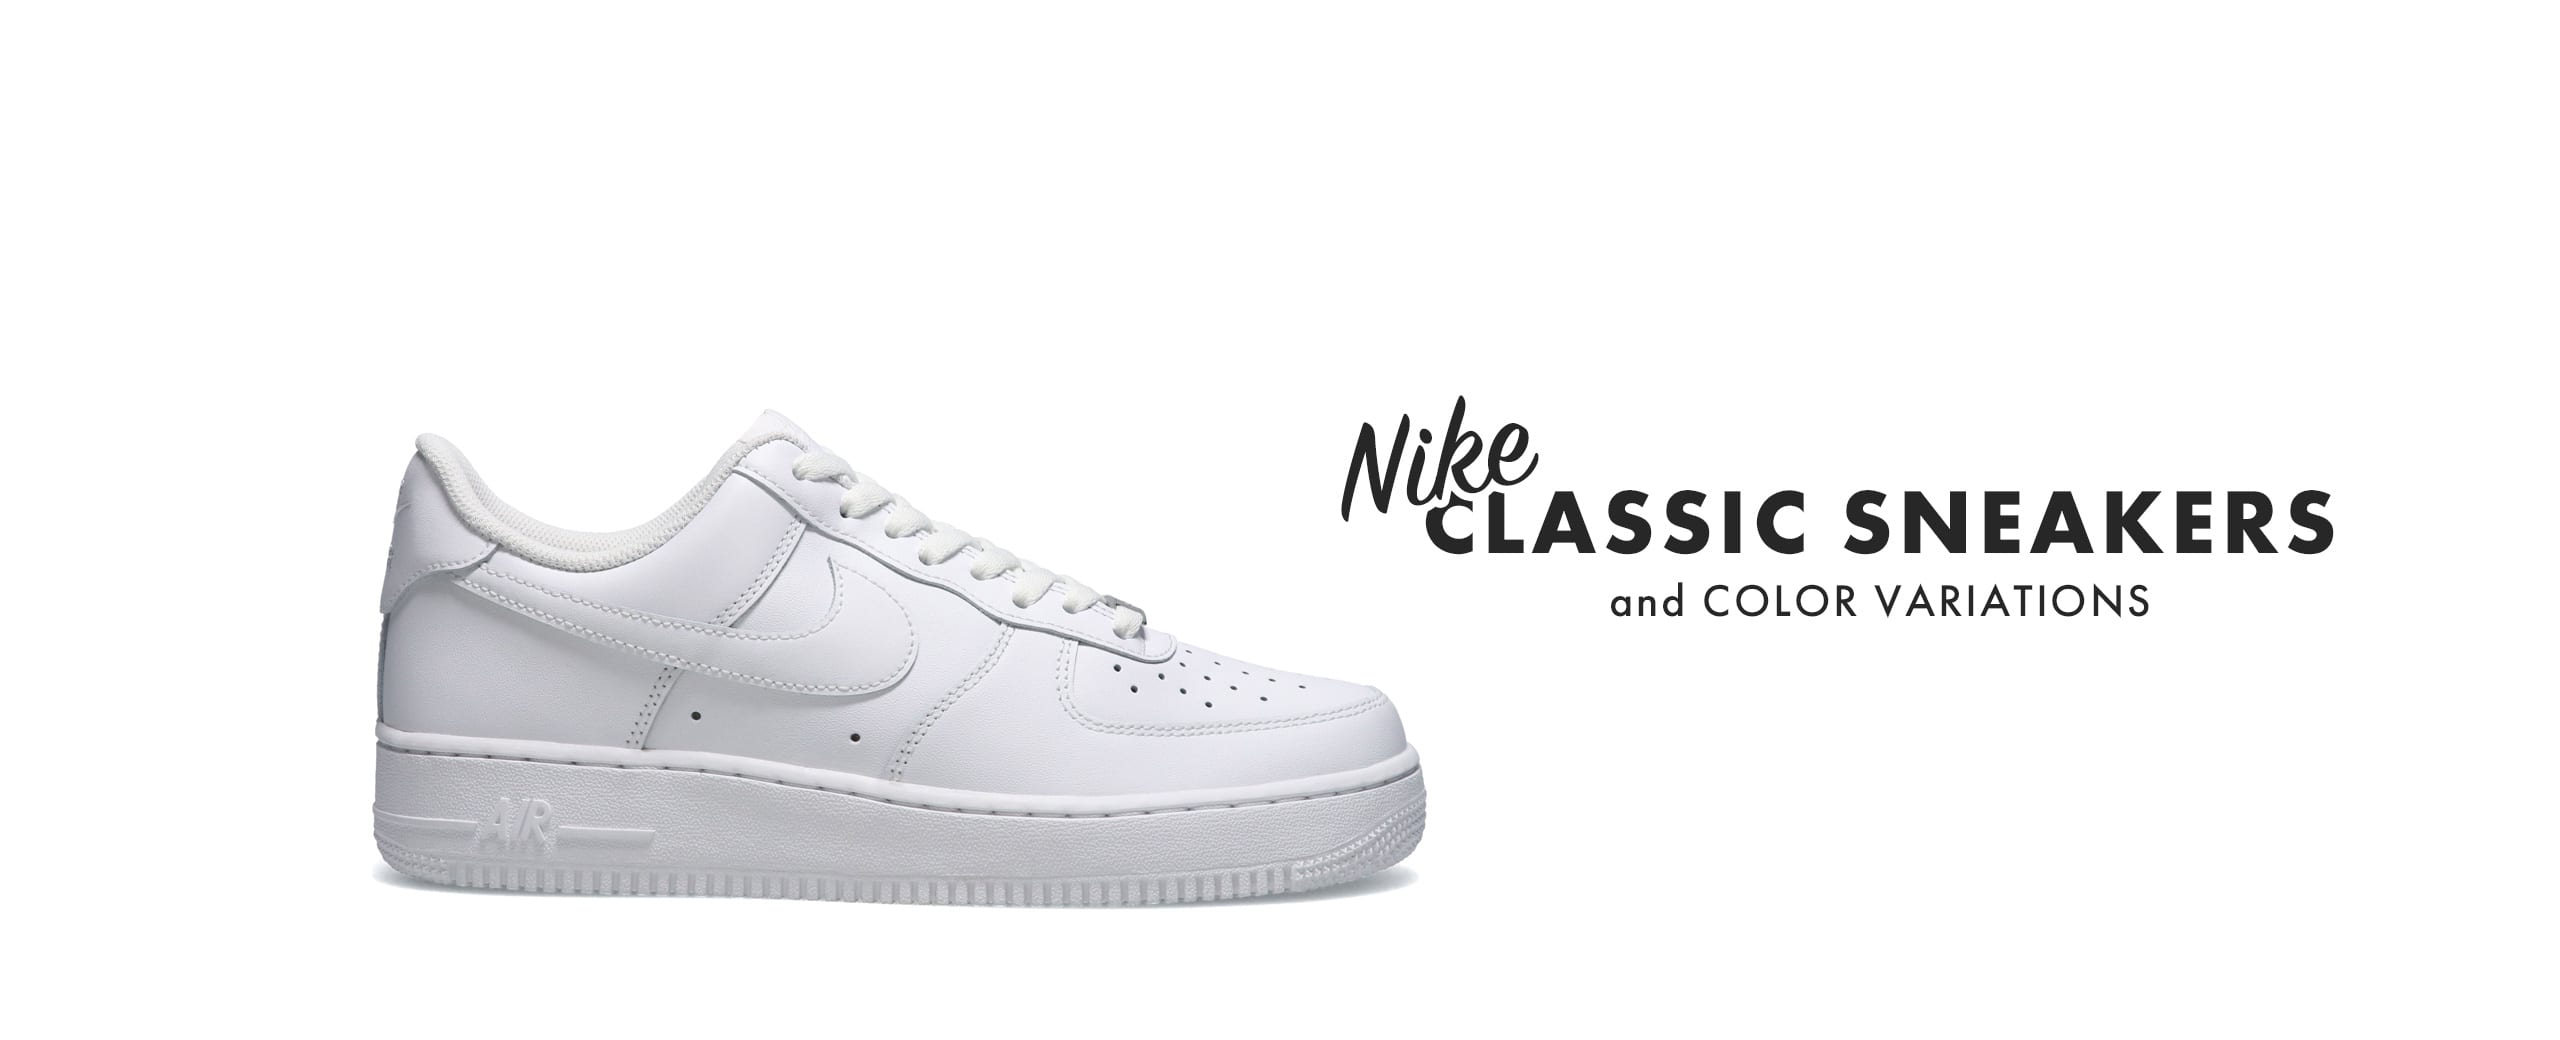 NIKE CLASSIC SNEAKERS AND COLOR VARIATIONS